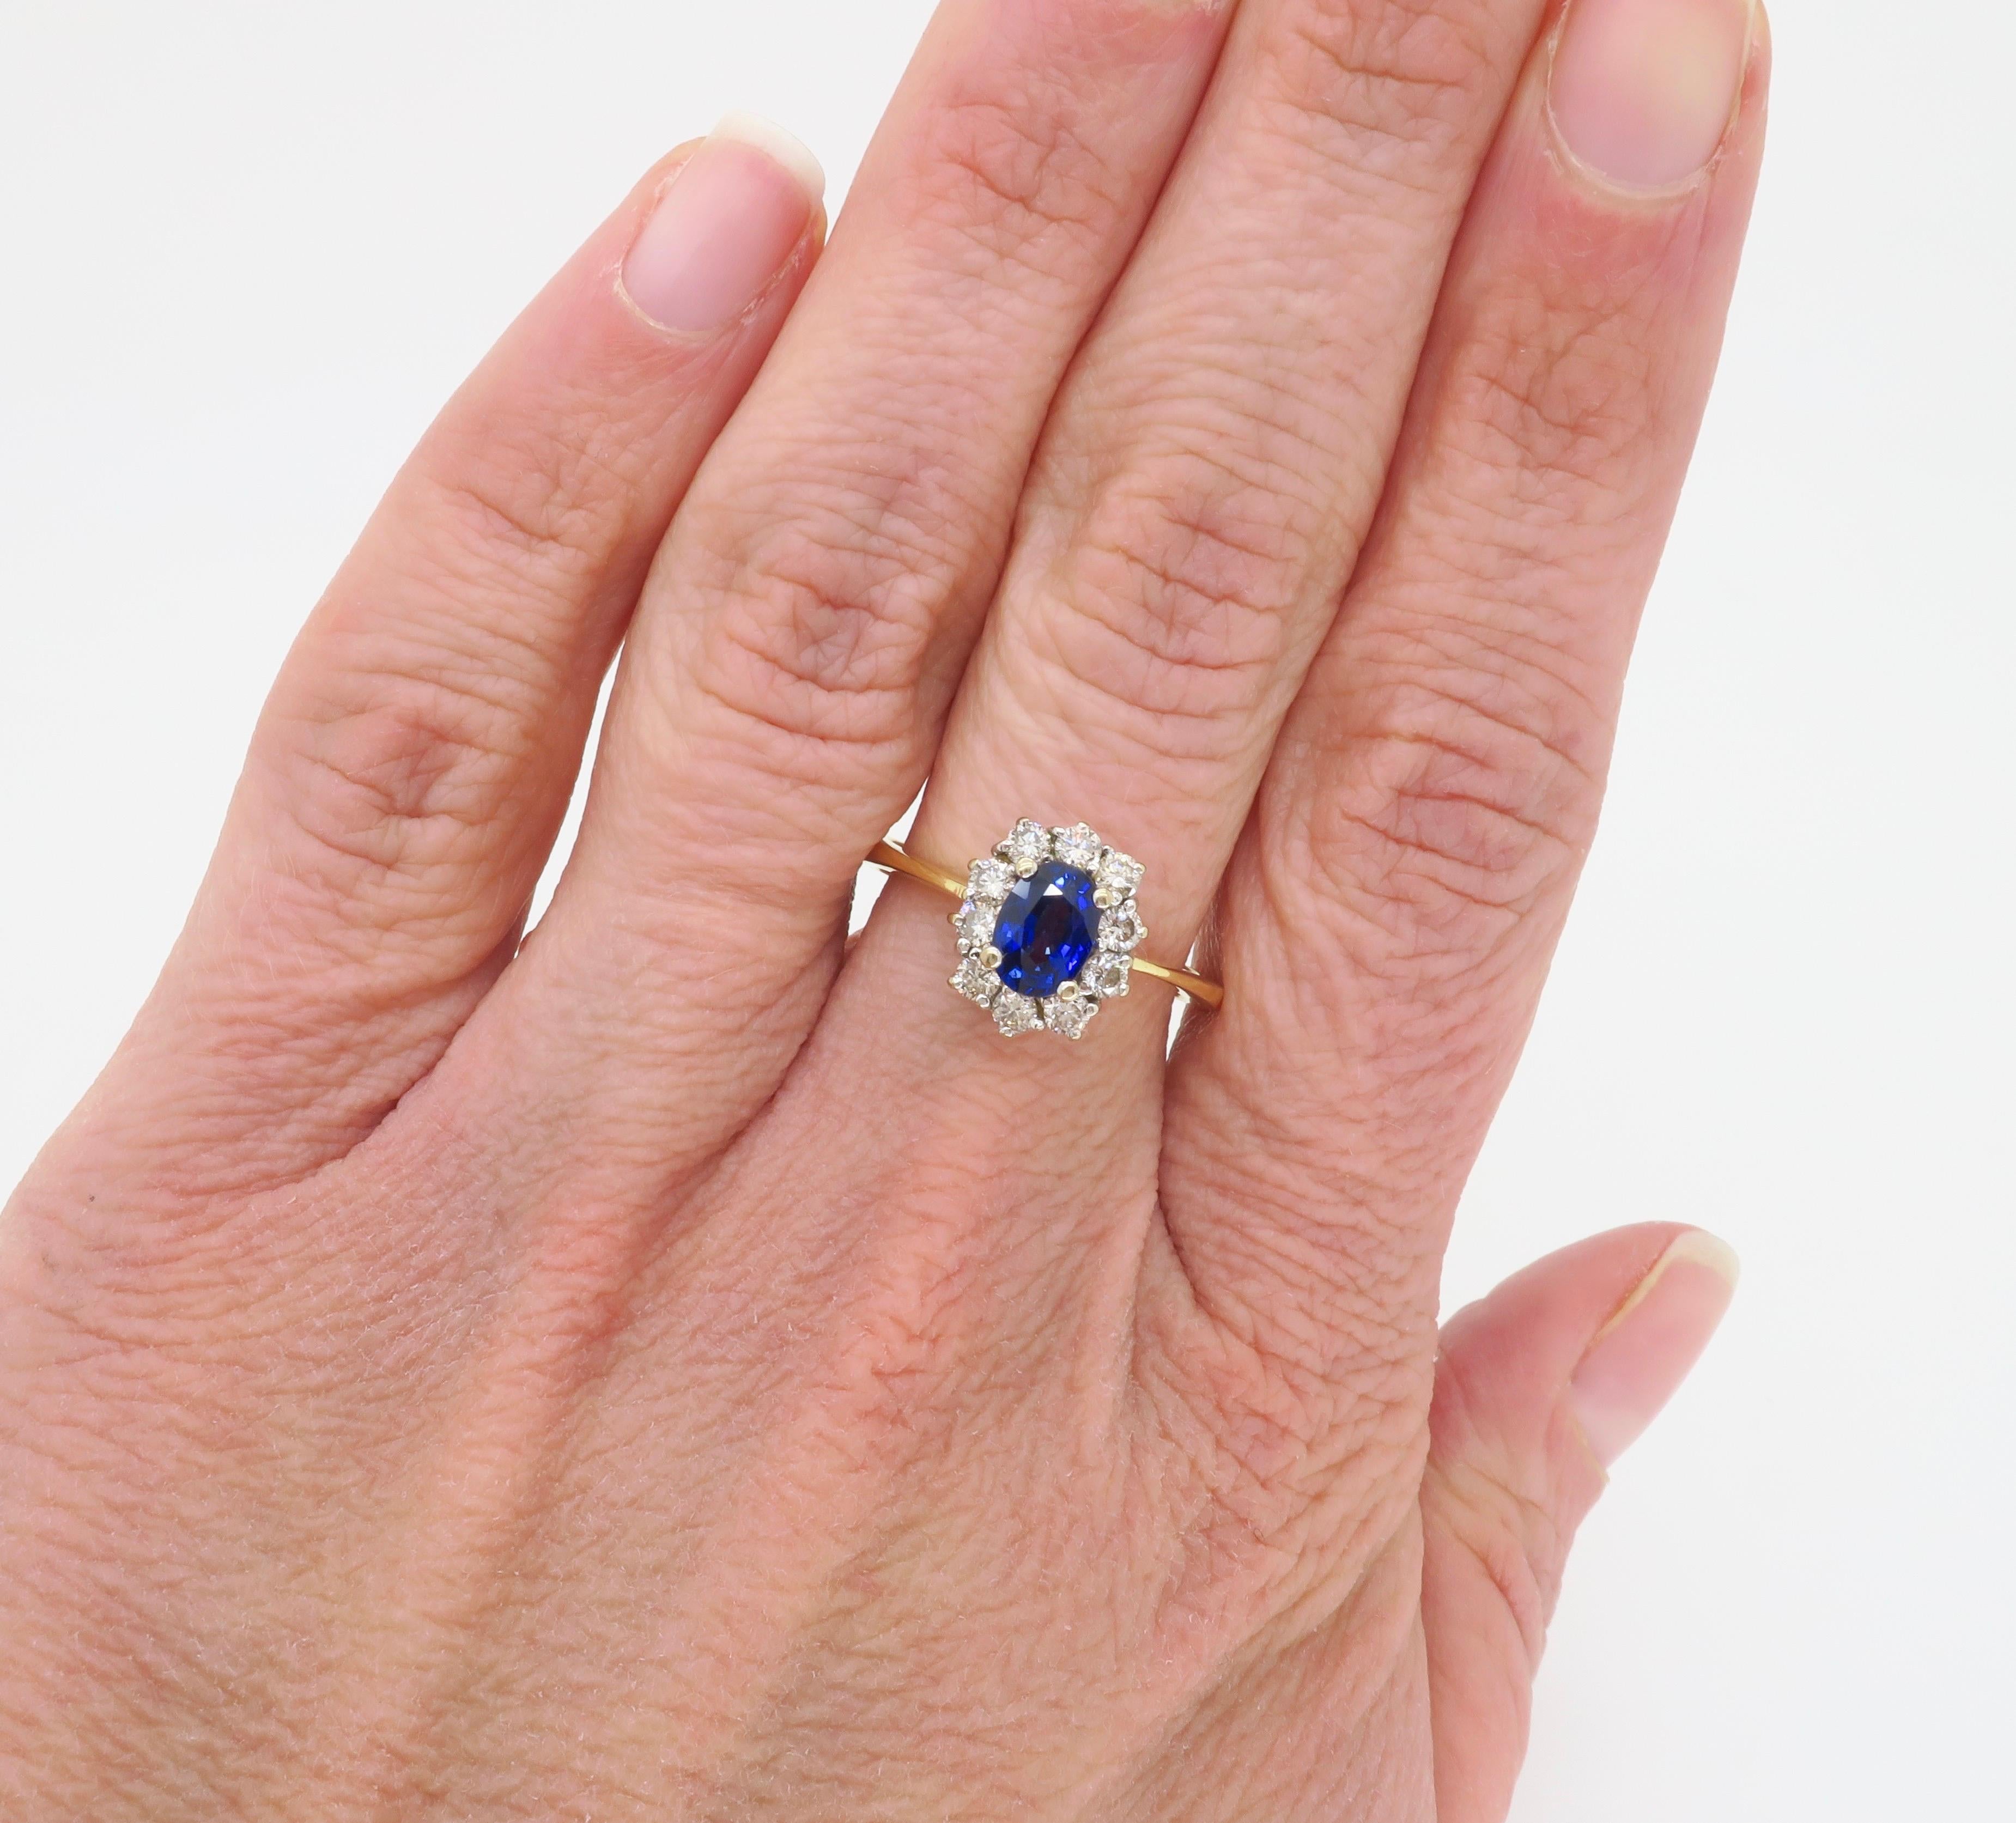 Classic GIA certified Blue Sapphire and Diamond mounted in 18k yellow gold.

Gemstone: Blue Sapphire & Diamond
Diamond Carat Weight: .50CTW
Diamond Cut: Round Brilliant Cut Diamonds
Sapphire Carat Weight: Approximately .80CTW
GIA Certification: